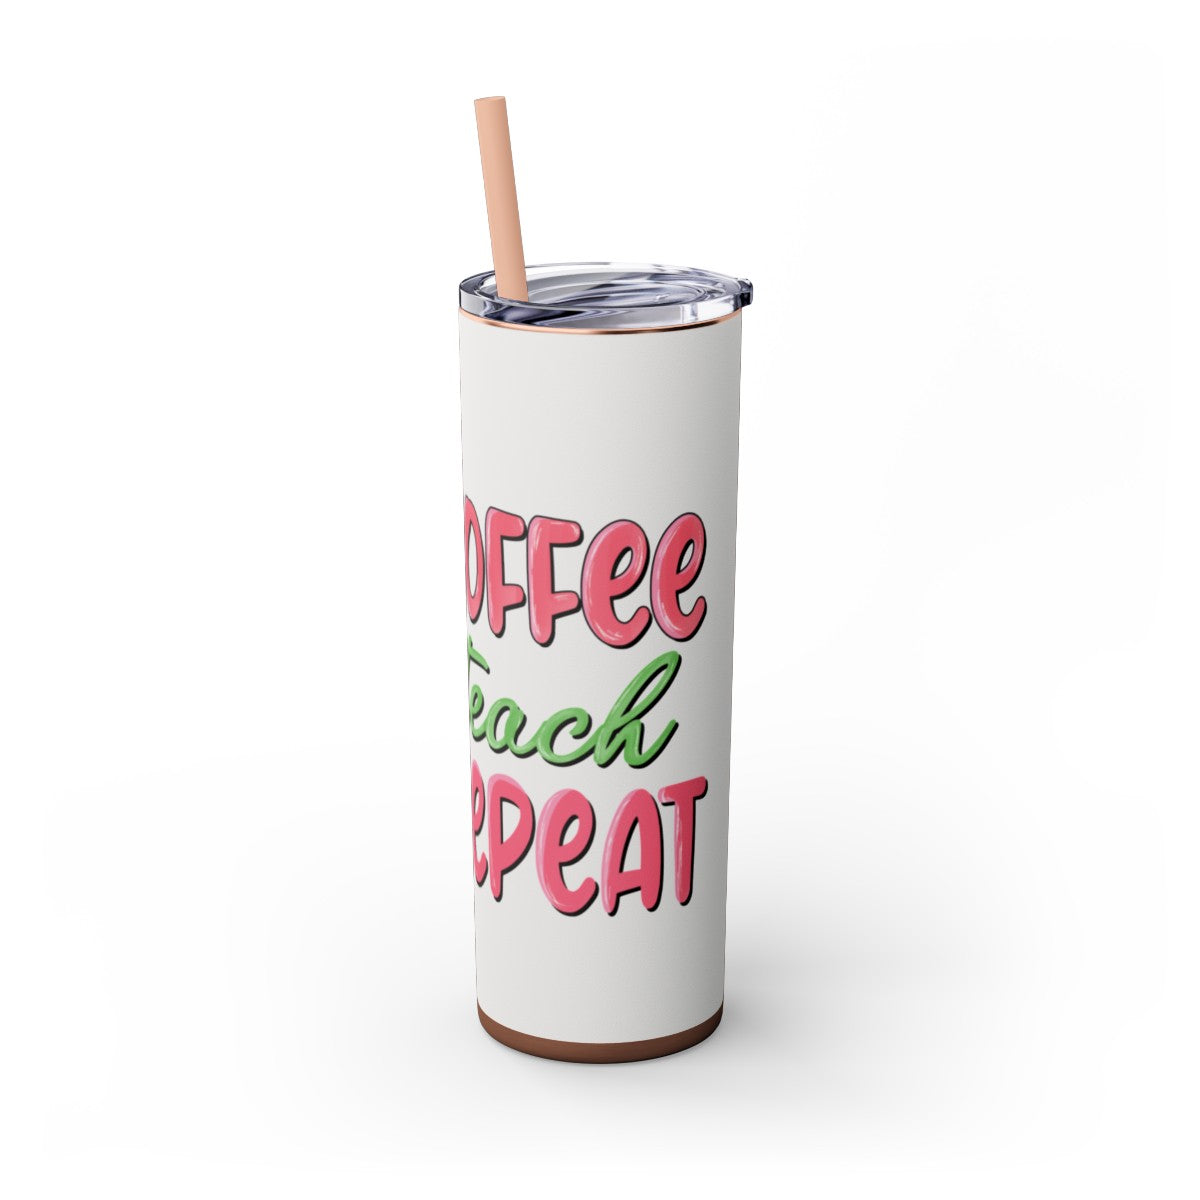 Get trendy with Coffee Teach Repeat Skinny Tumbler with Straw, 20oz -  available at Good Gift Company. Grab yours for $44.20 today!